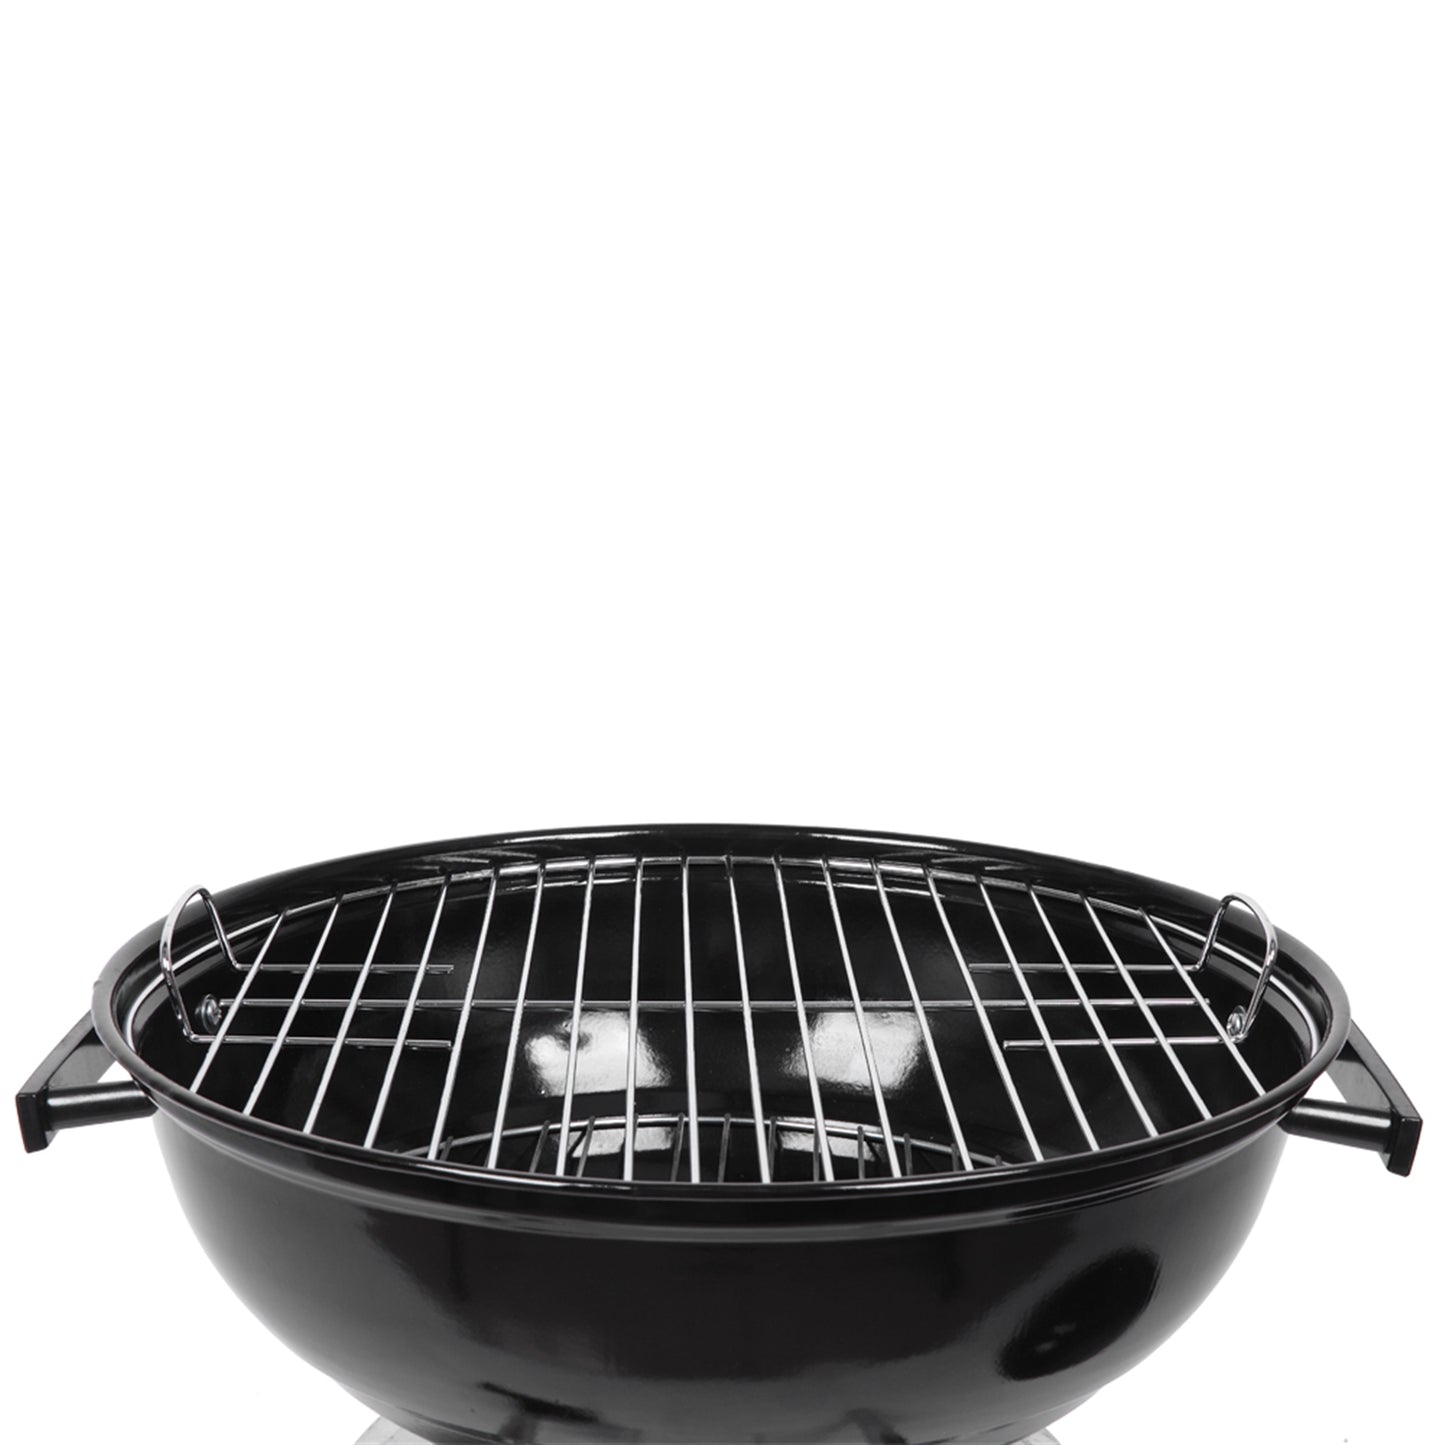 Charcoal Stove BBQ Grill For Outdoor Cooking